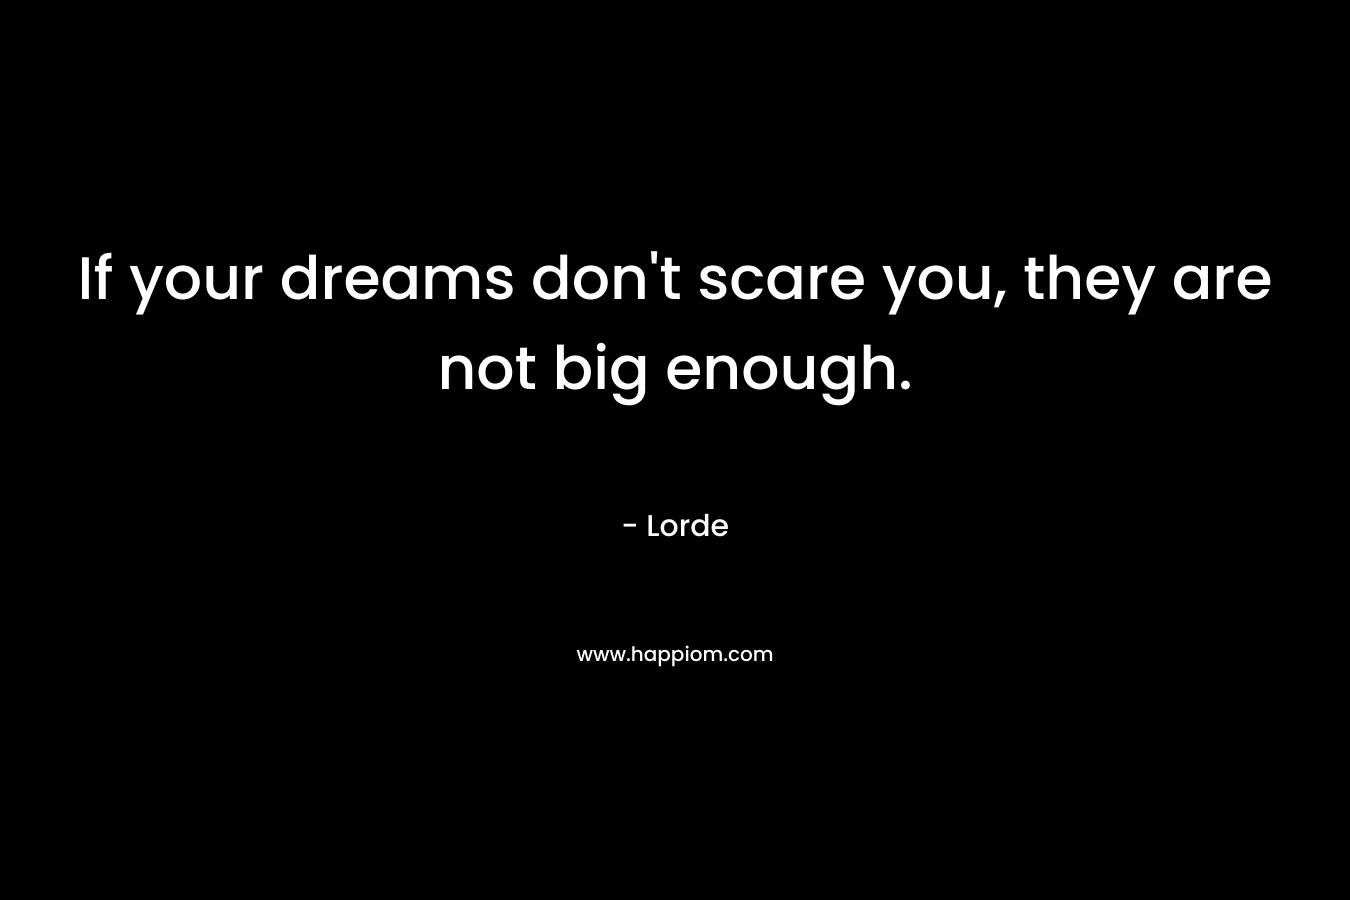 If your dreams don't scare you, they are not big enough.